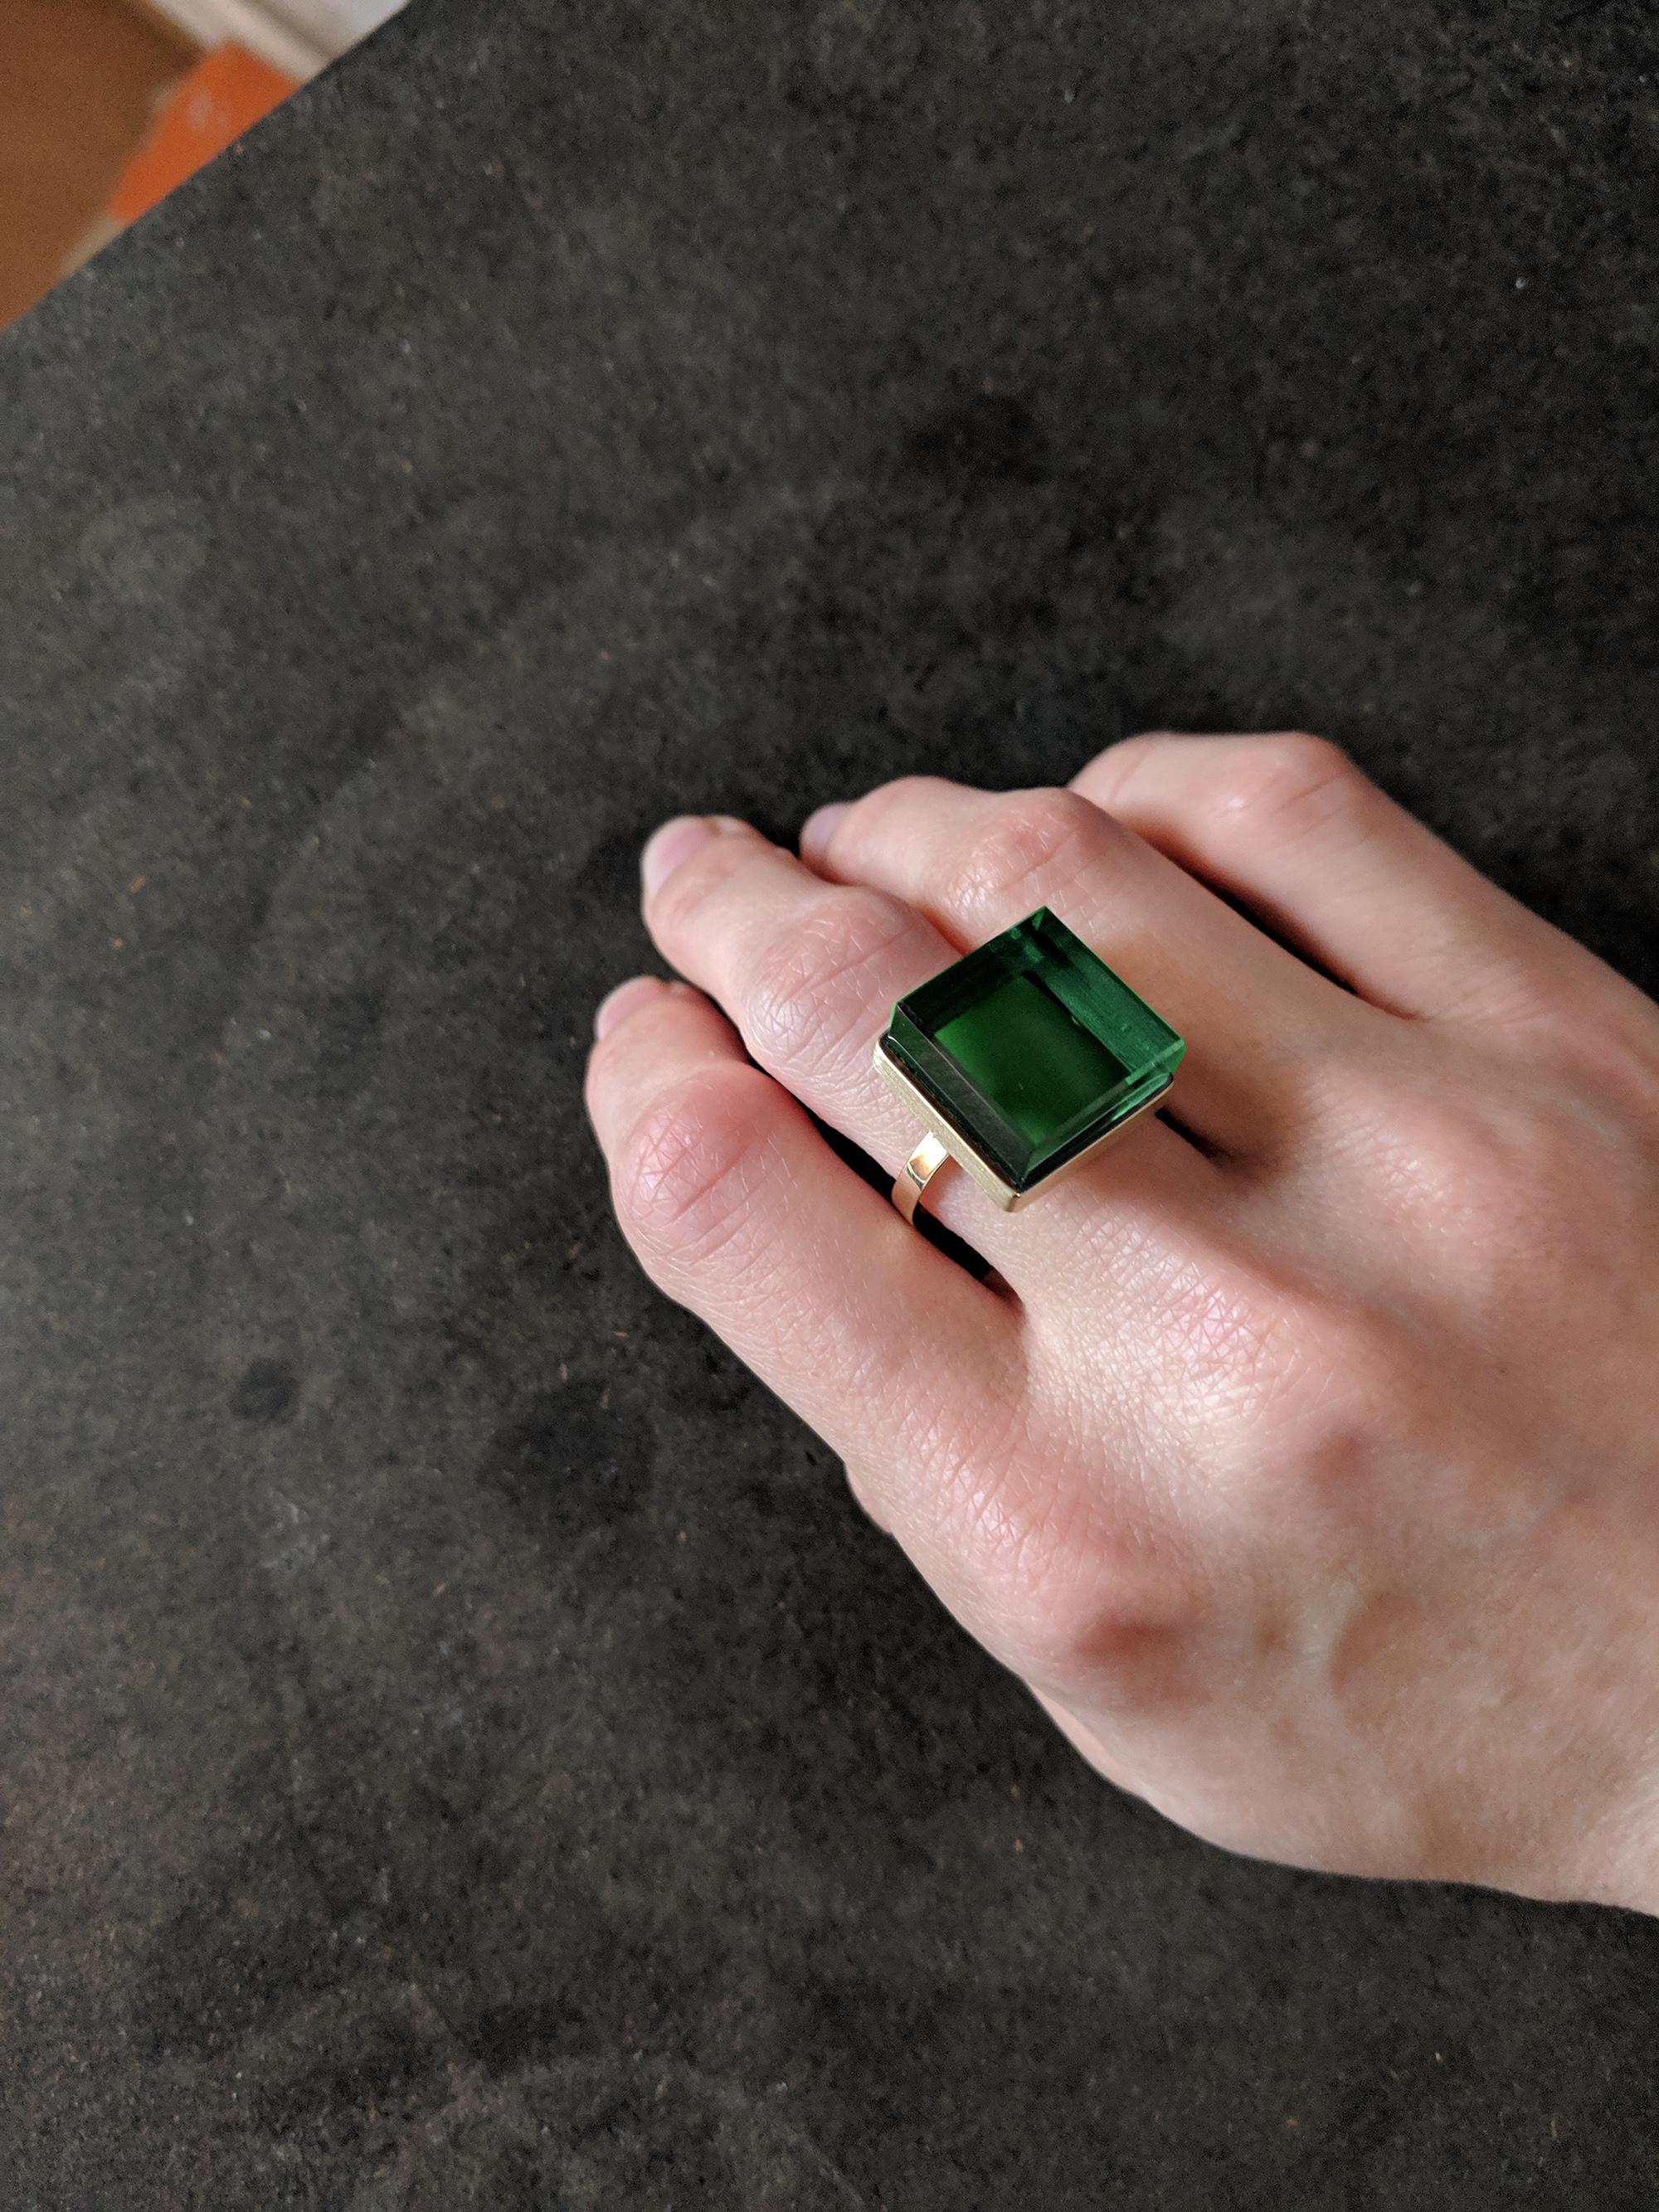 This ring is made of 18 karat yellow gold and features a 15x15x8 mm green grown quartz. It has been featured in Harper's Bazaar and Vogue UA.

The ring reflects the art deco spirit and is suitable for both women and men. It inspires architects,